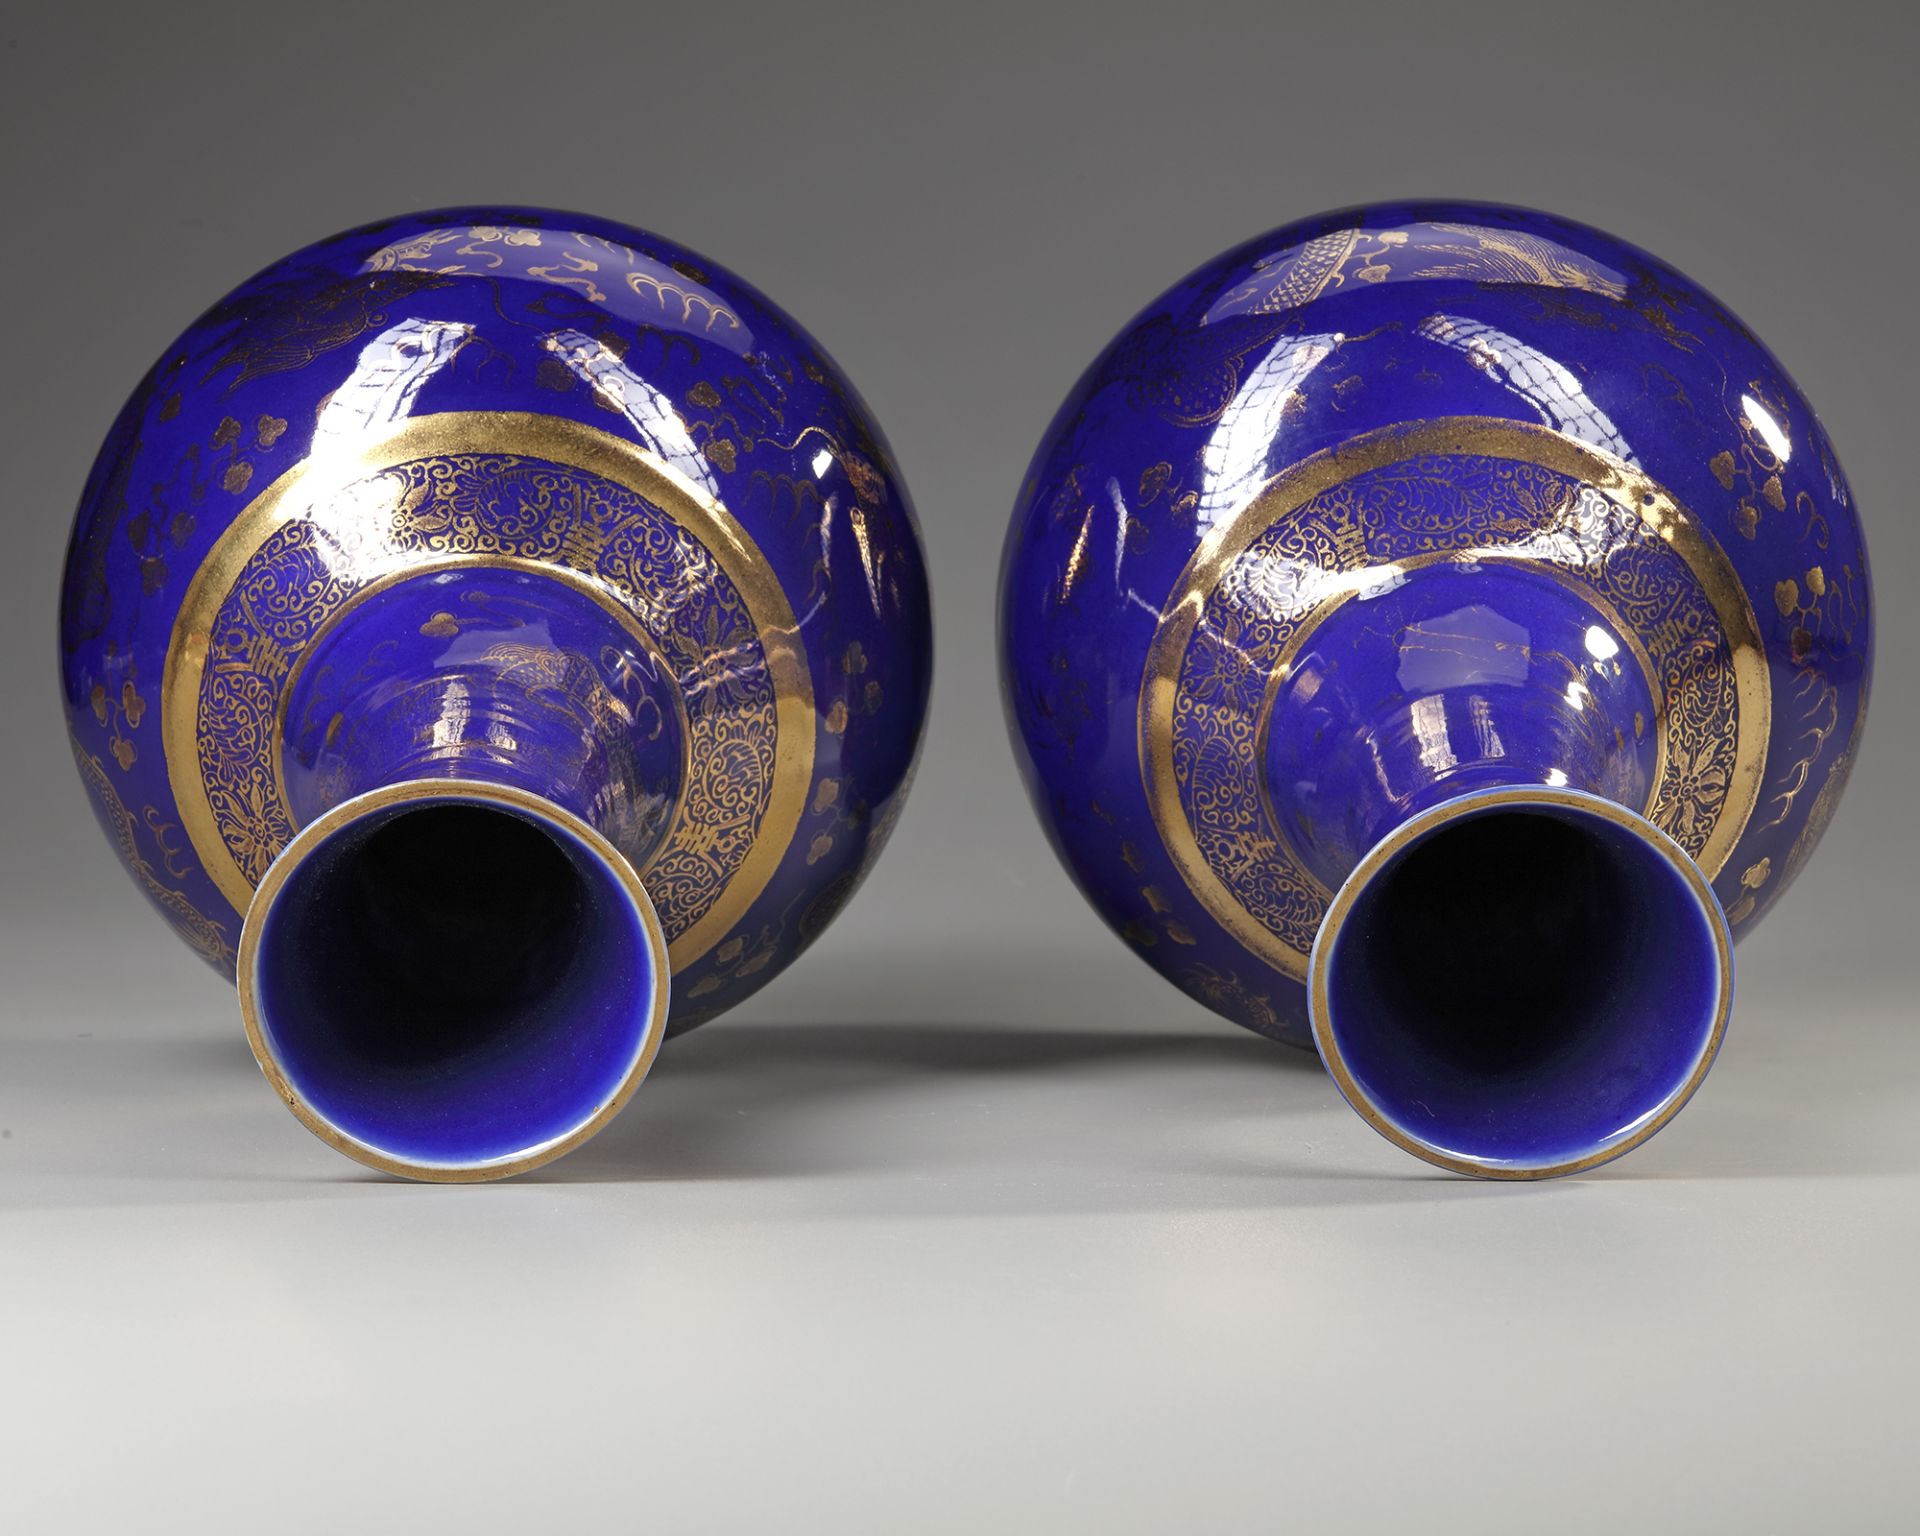 A PAIR OF CHINESE GILT POWDER-BLUE BOTTLE VASES, LATE 19TH-EARLY 20TH CENTURY - Image 3 of 4